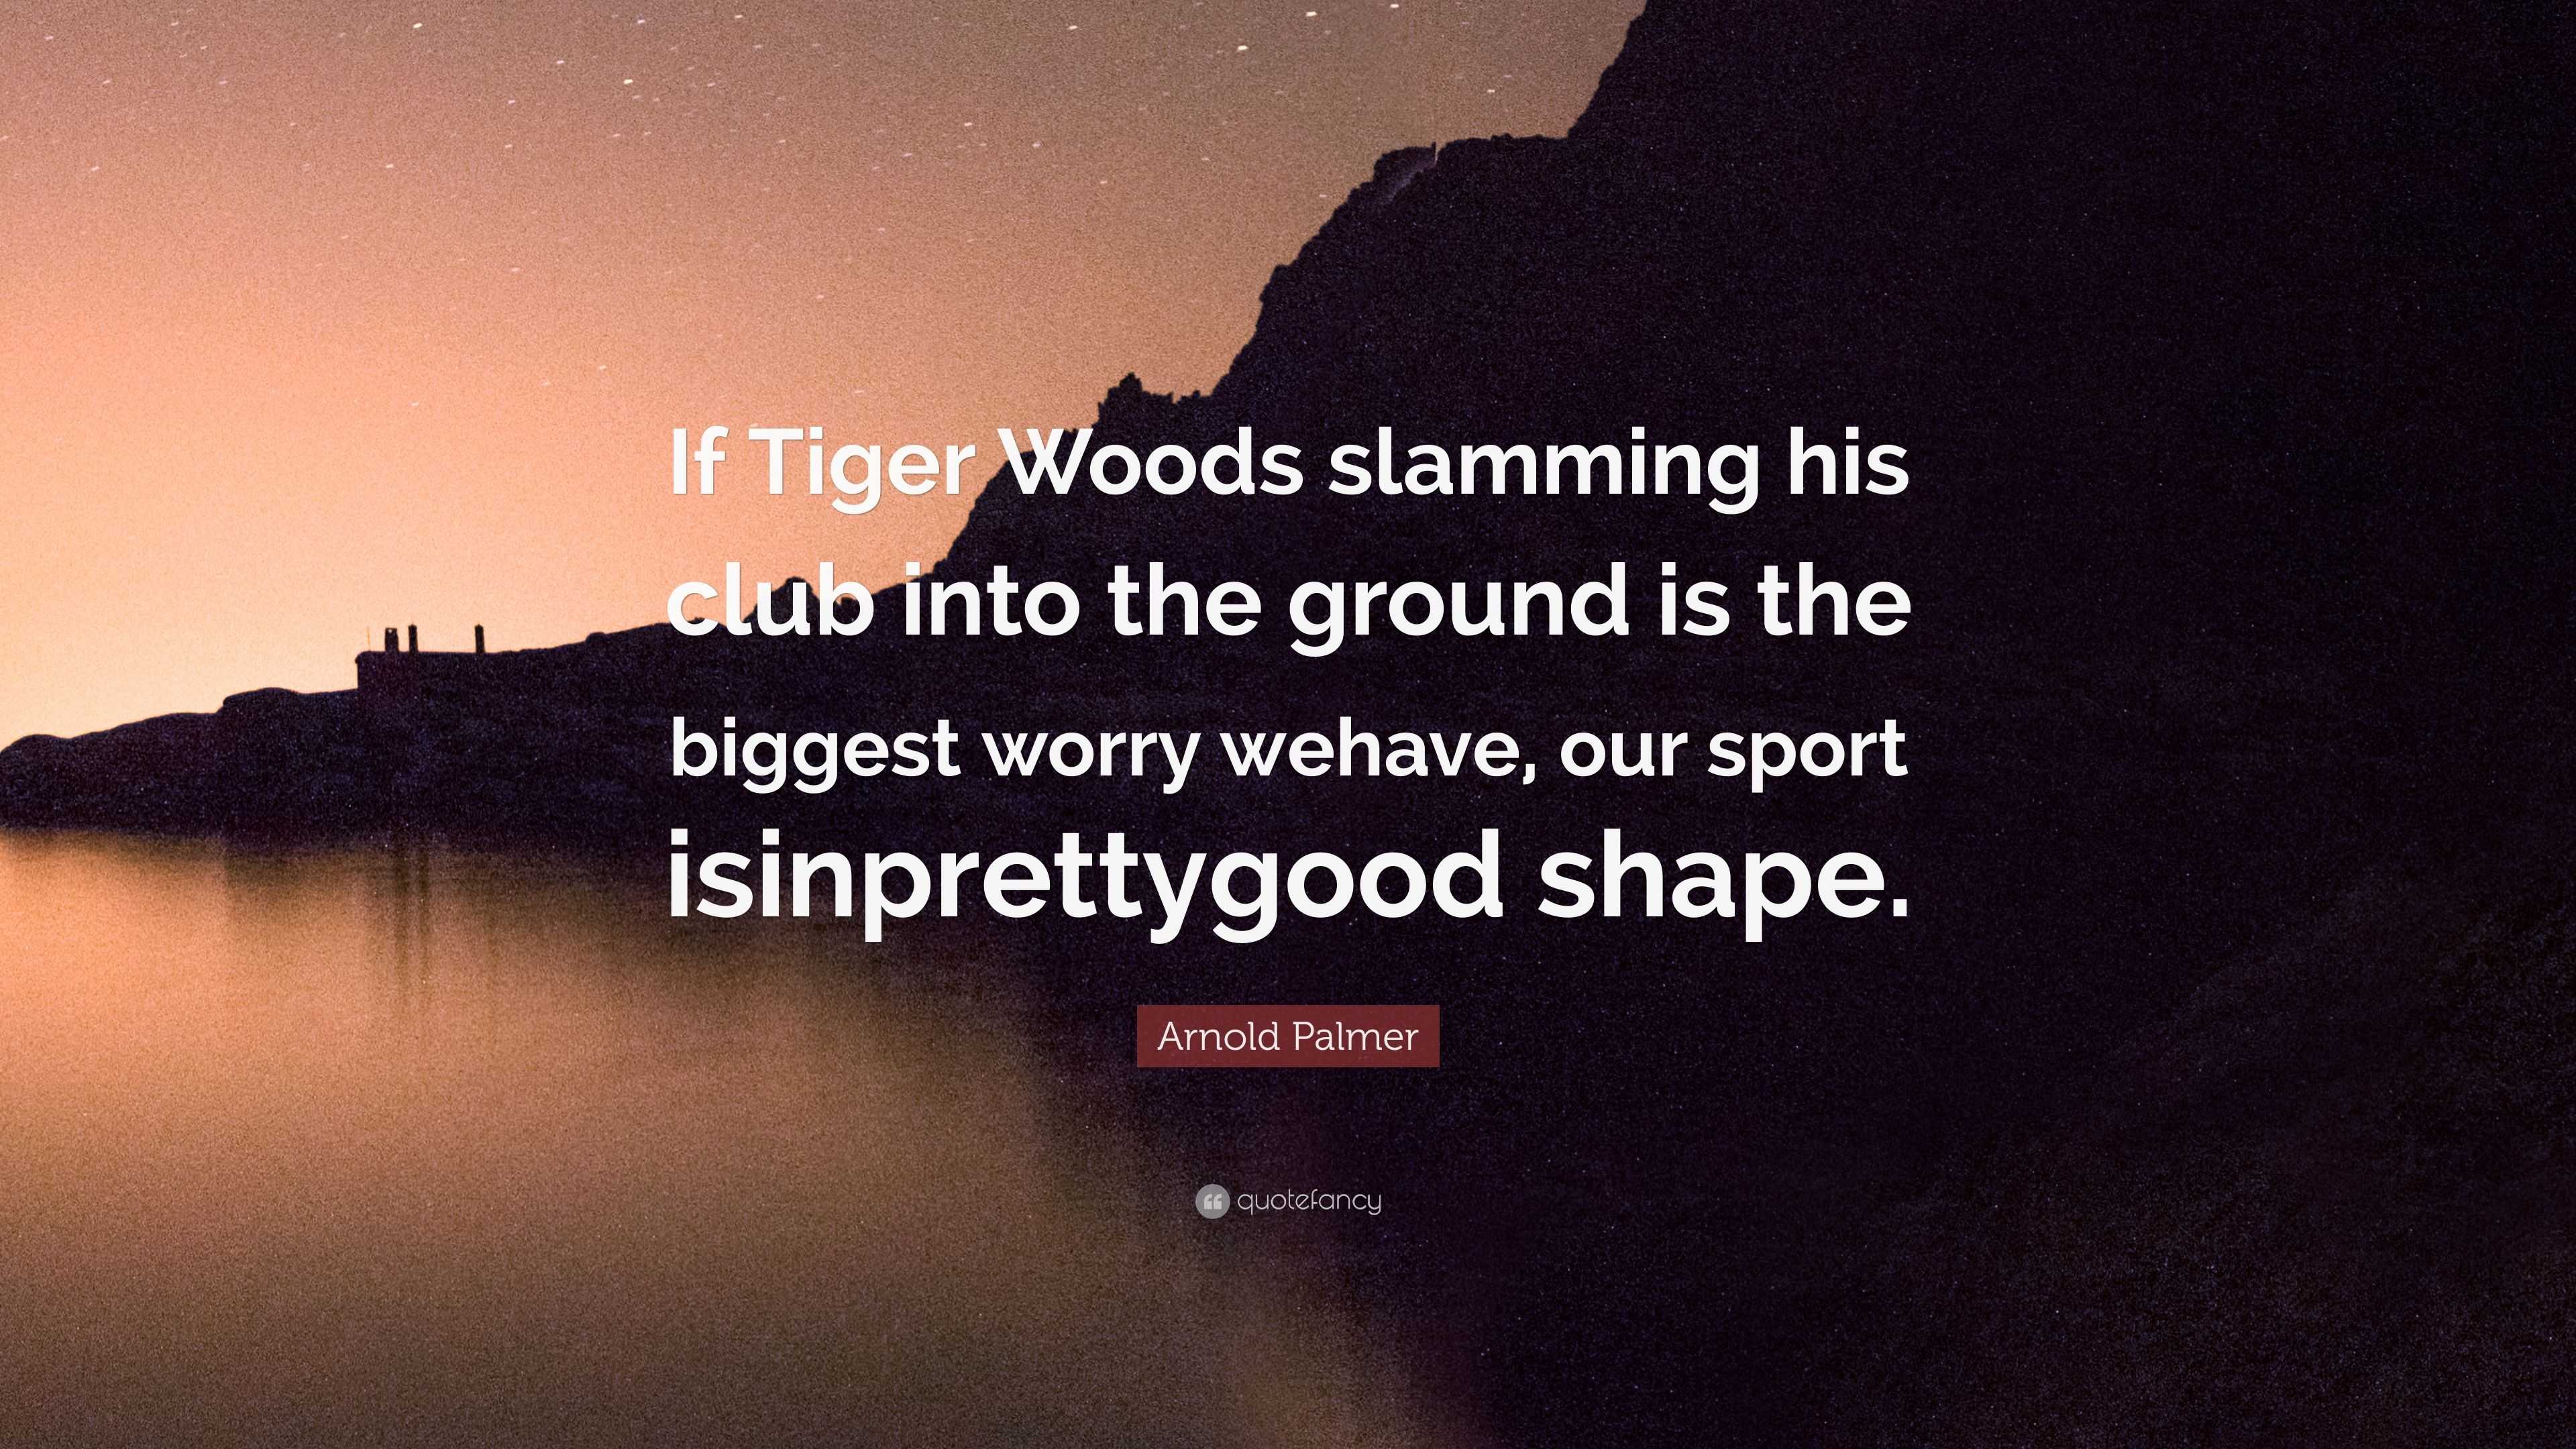 Arnold Palmer Quote: “If Tiger Woods slamming his club into the ground is  the biggest worry